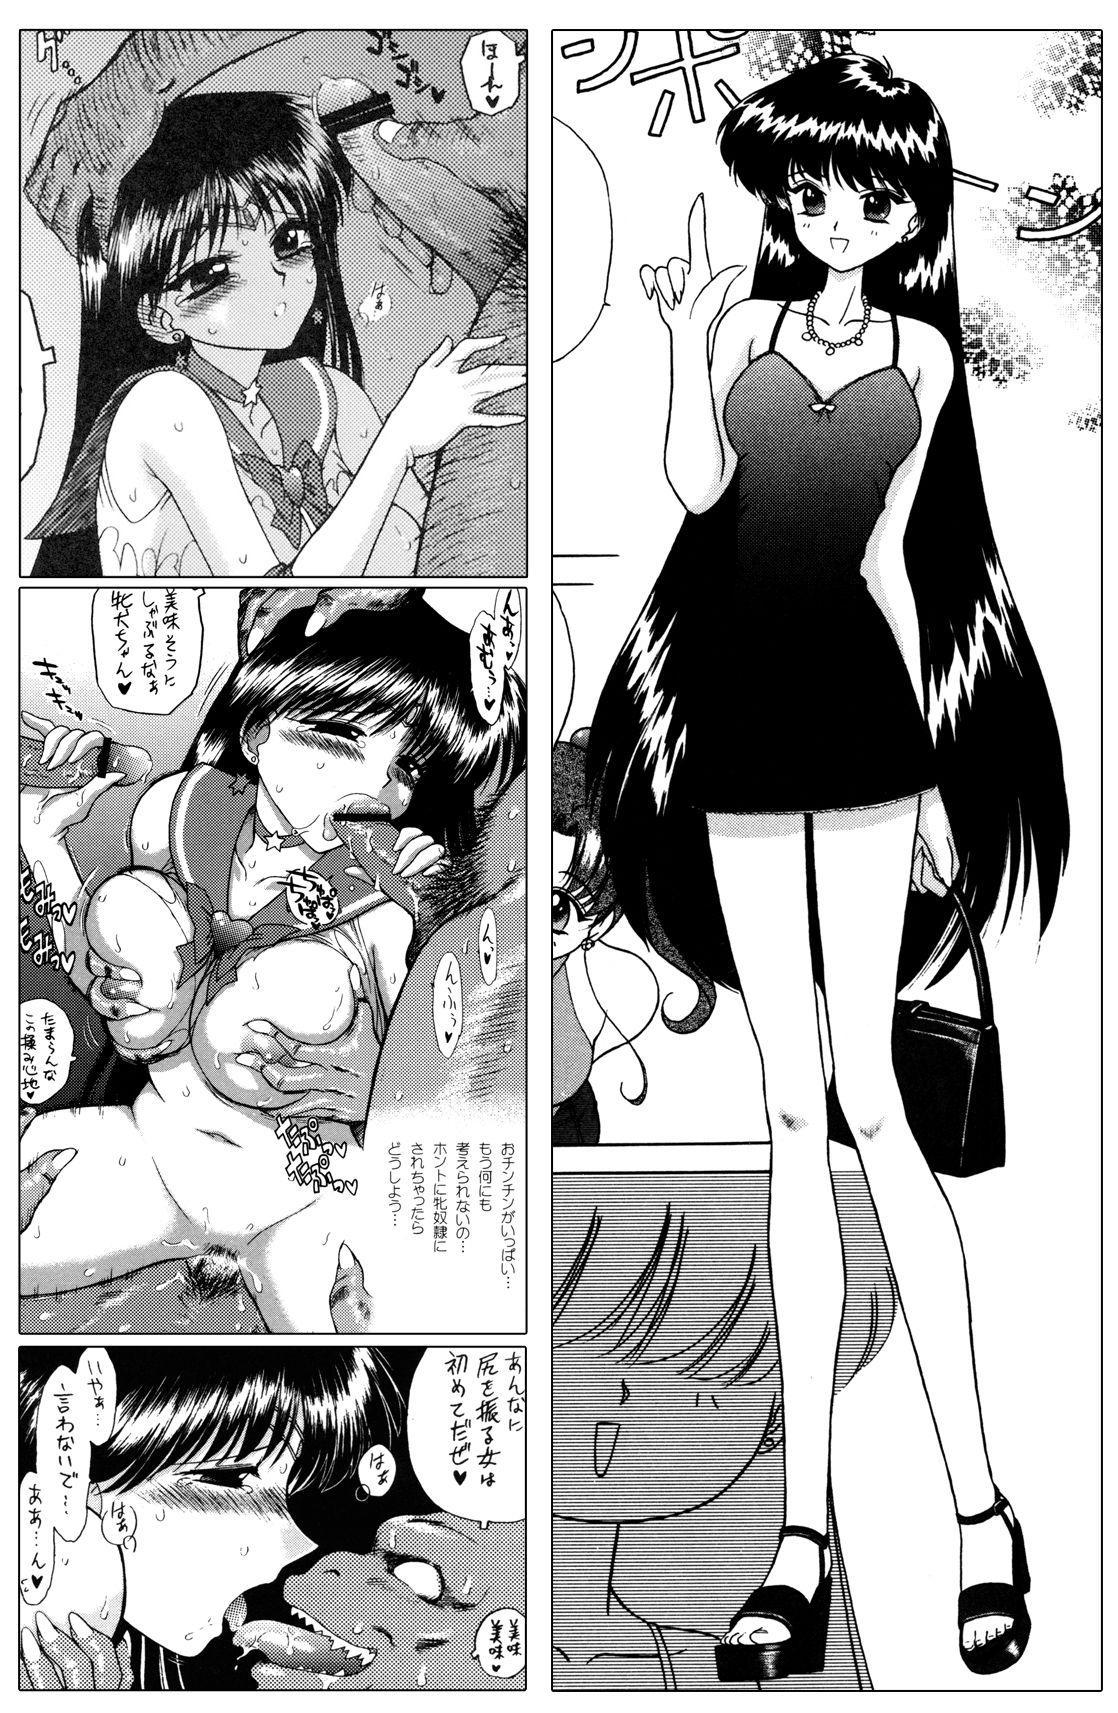 Couch QUEEN OF SPADES - 黑桃皇后 - Sailor moon Condom - Page 12